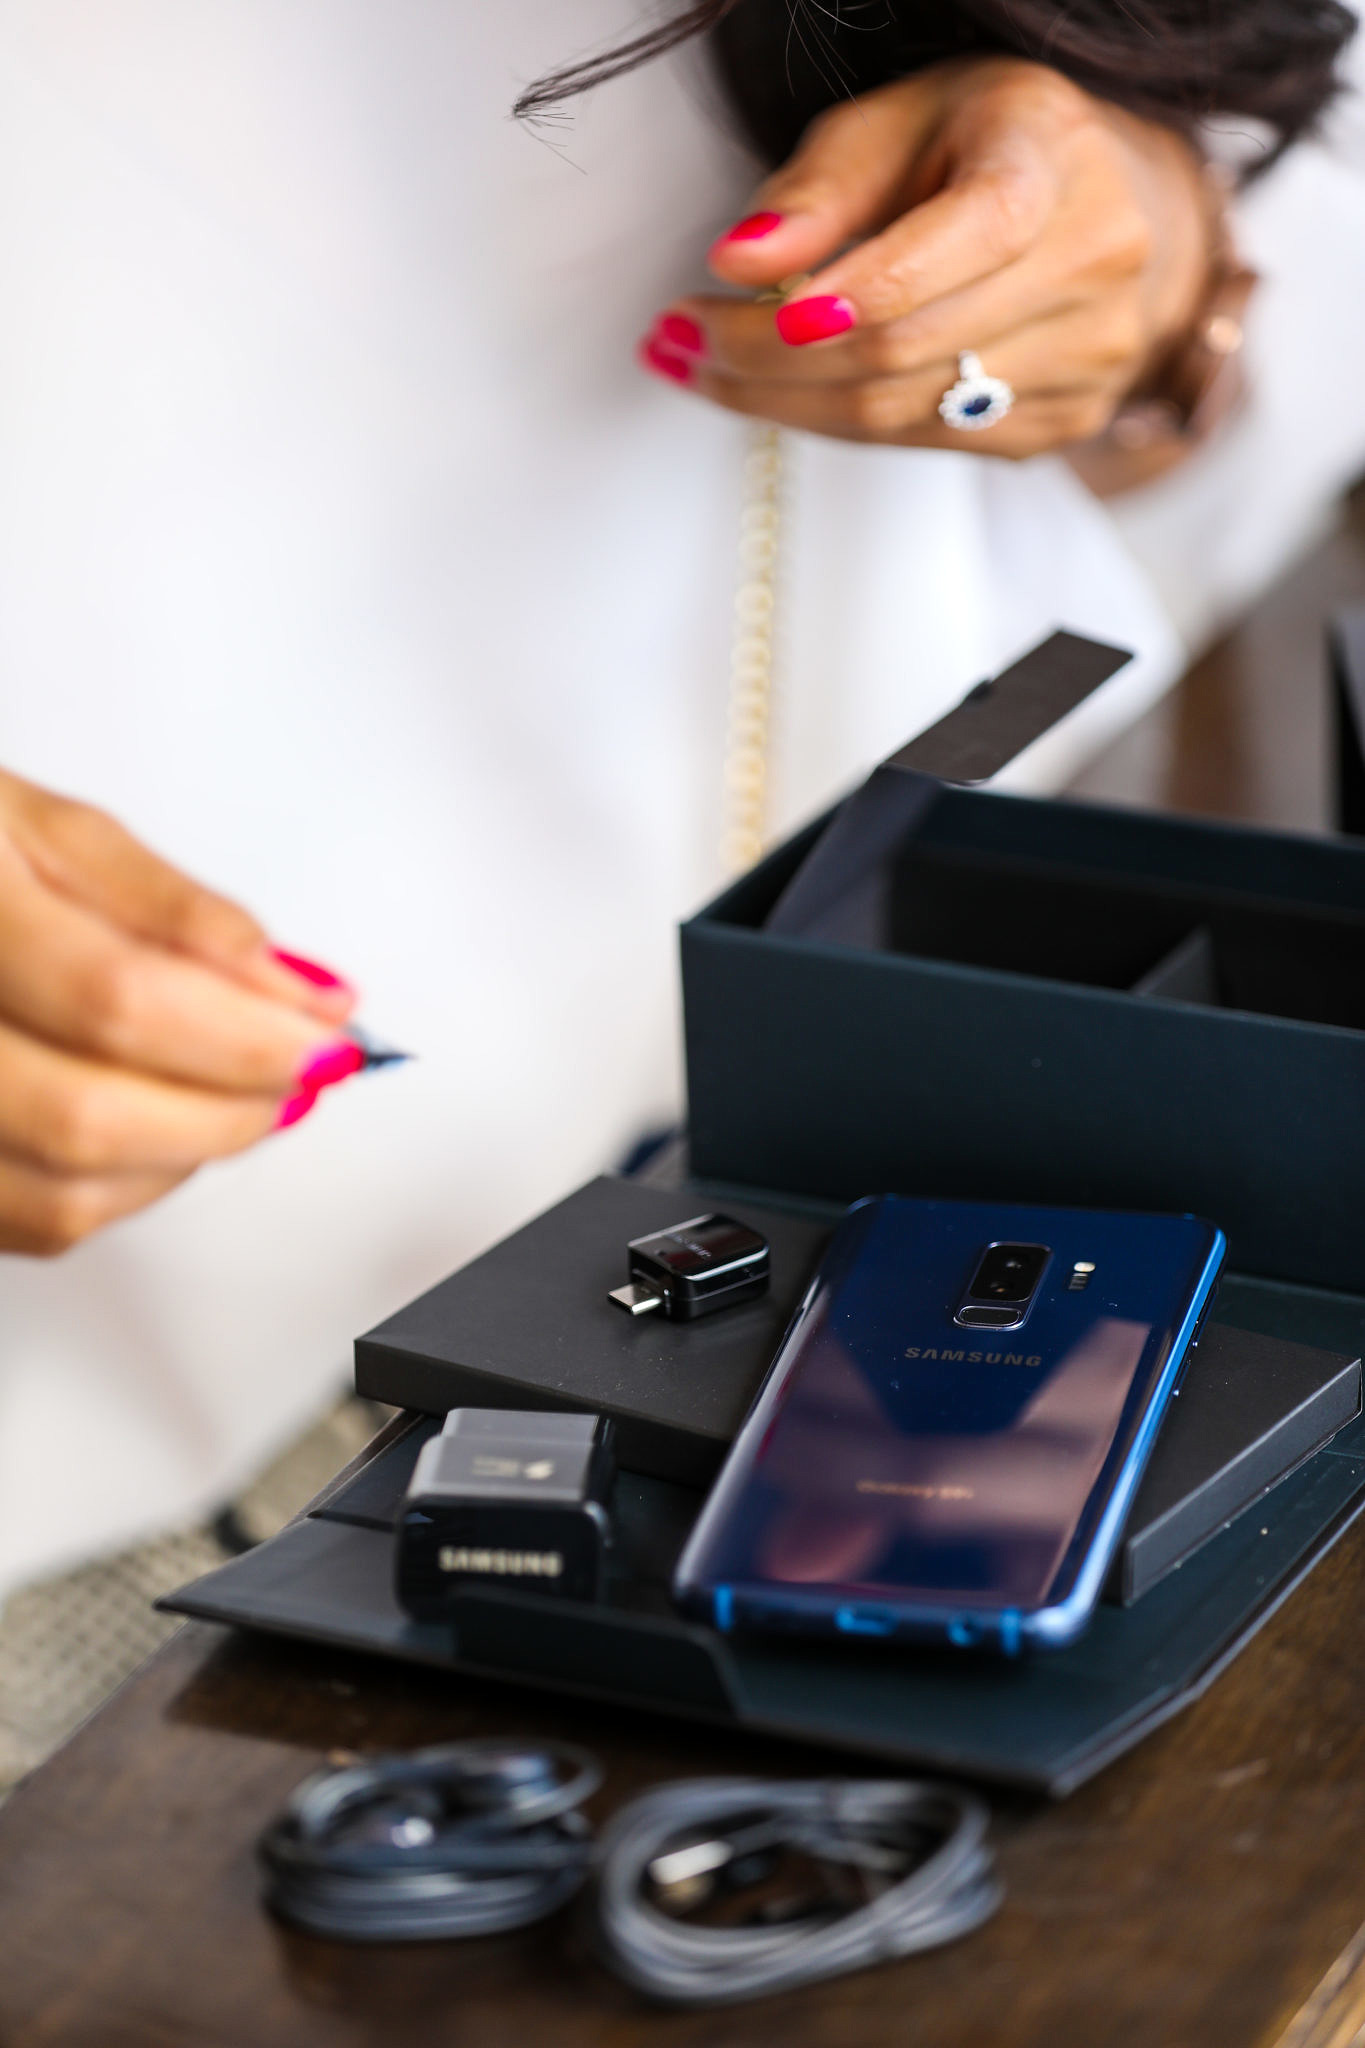 Gifting Occasions: Father's Day or New Grads - Get the Samsung Galaxy S9+ Phone